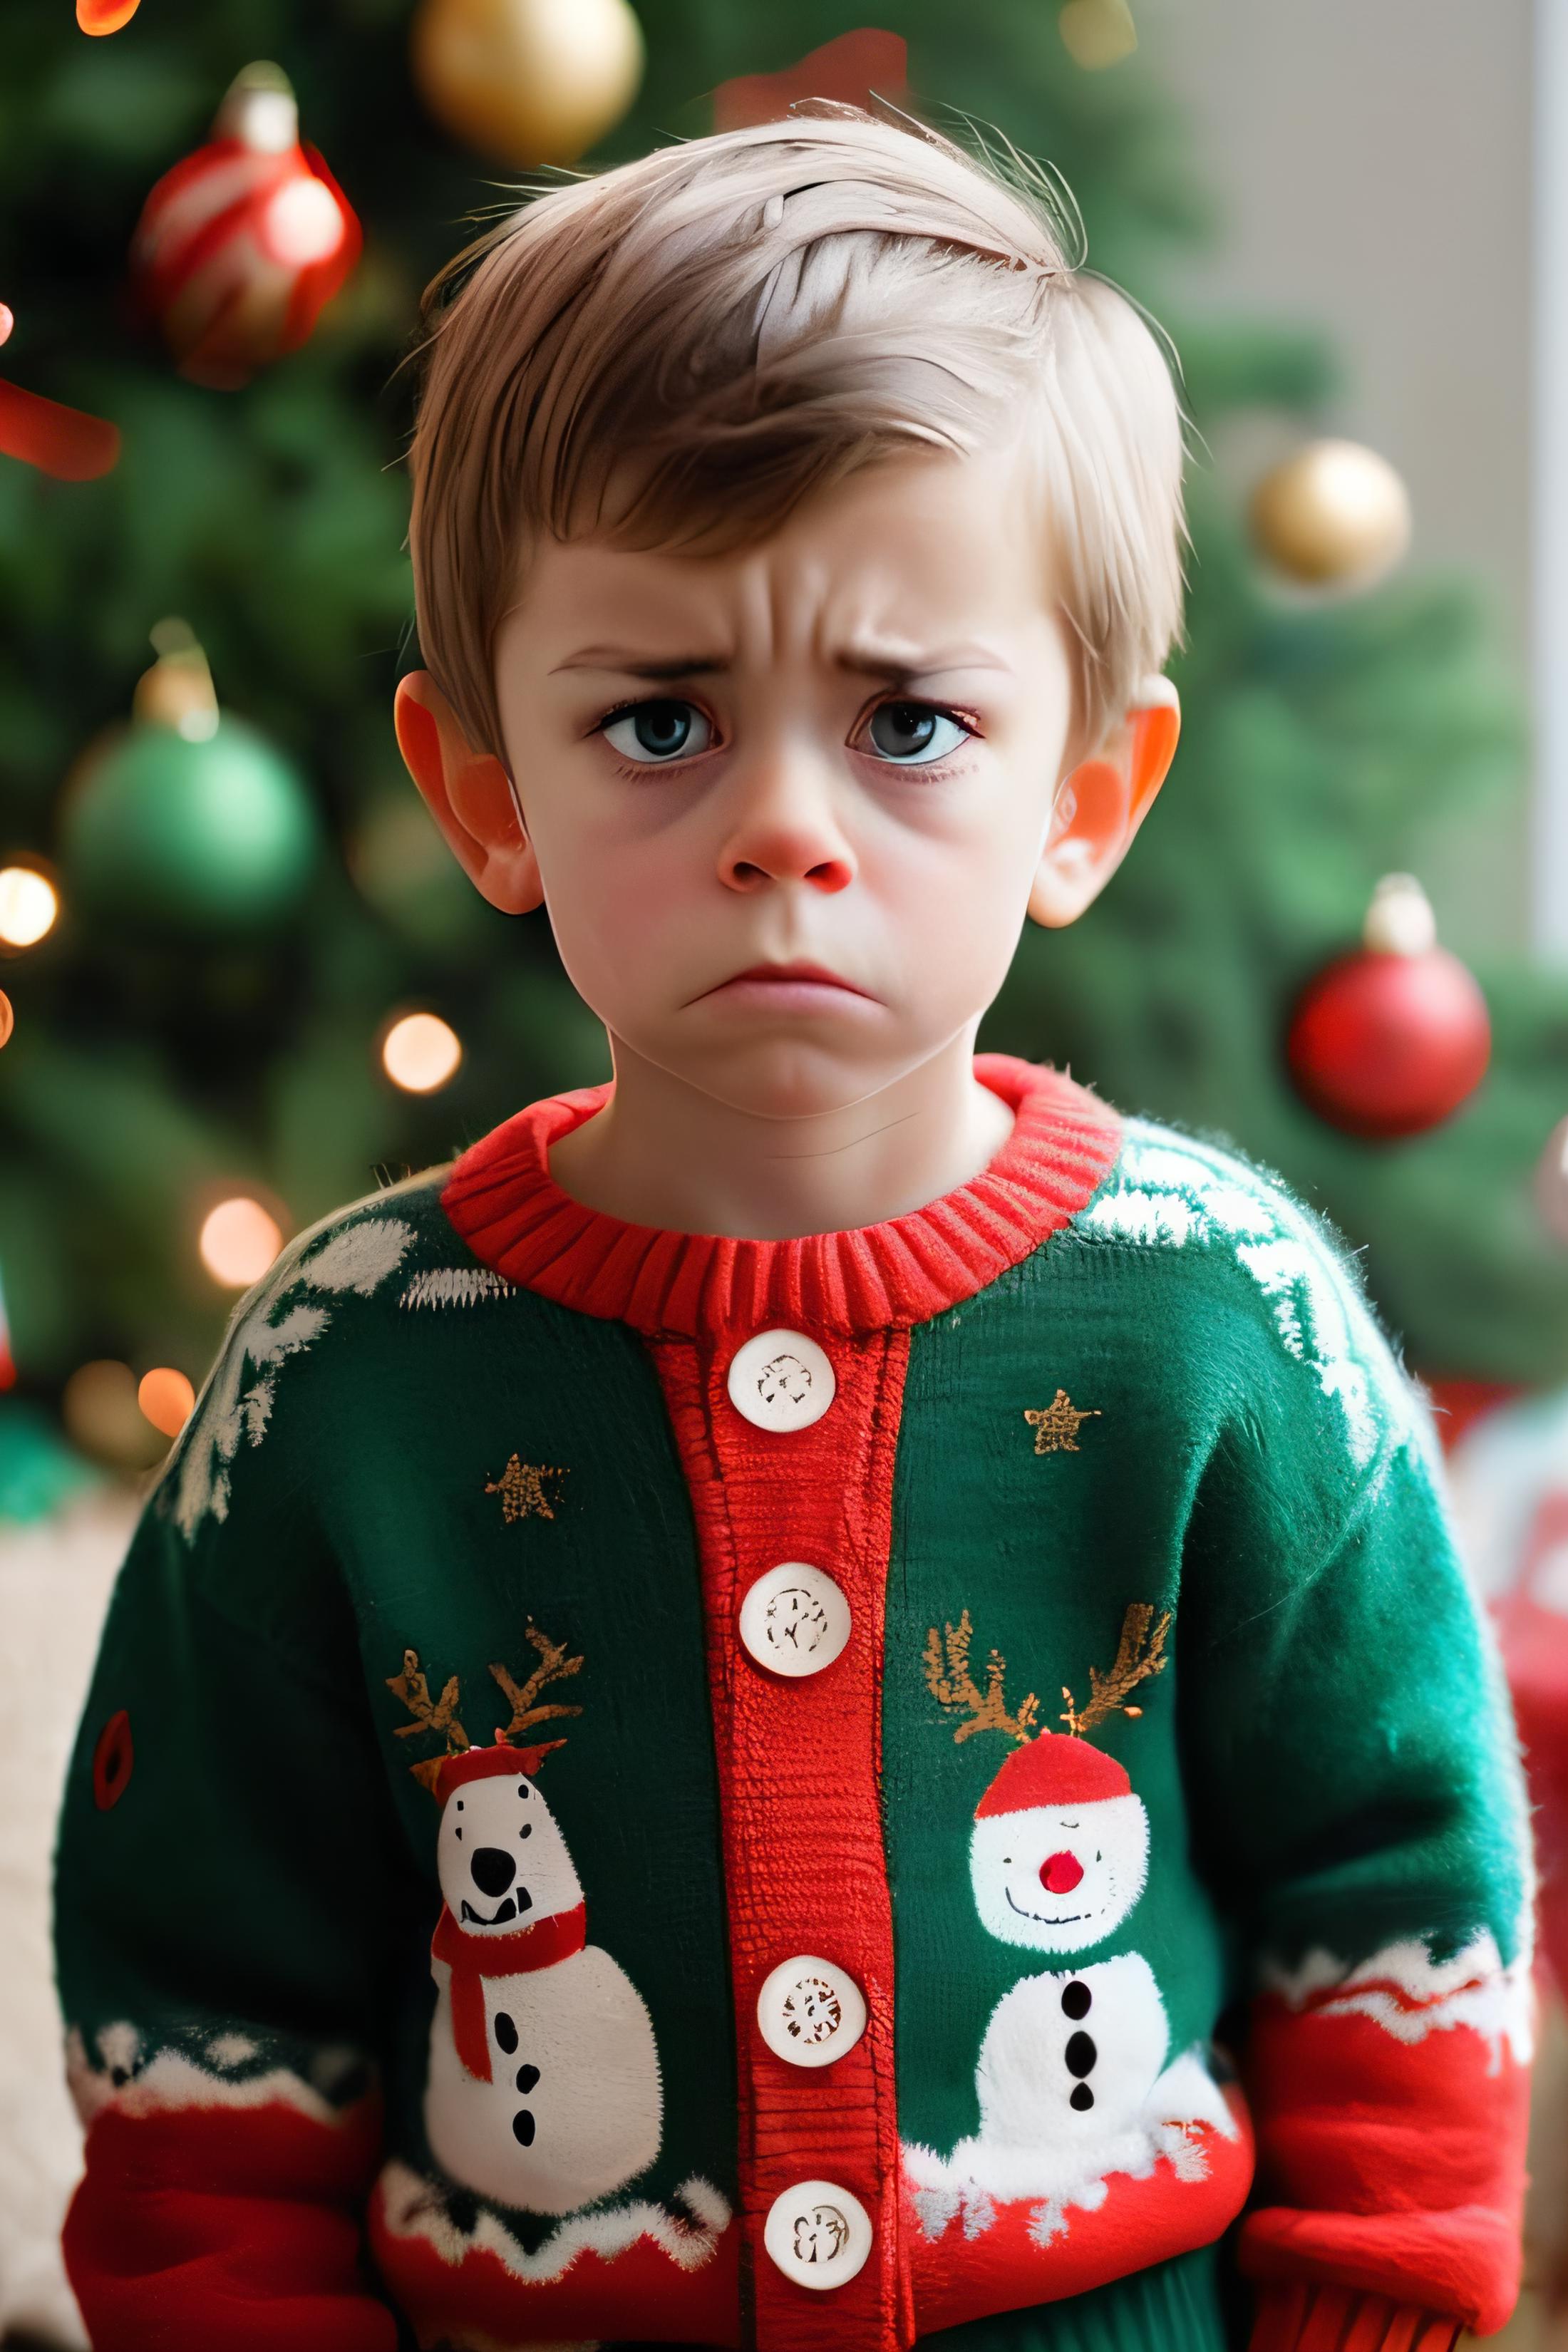 A young child wearing a Christmas sweater with Rudolph the reindeer and Santa Claus.